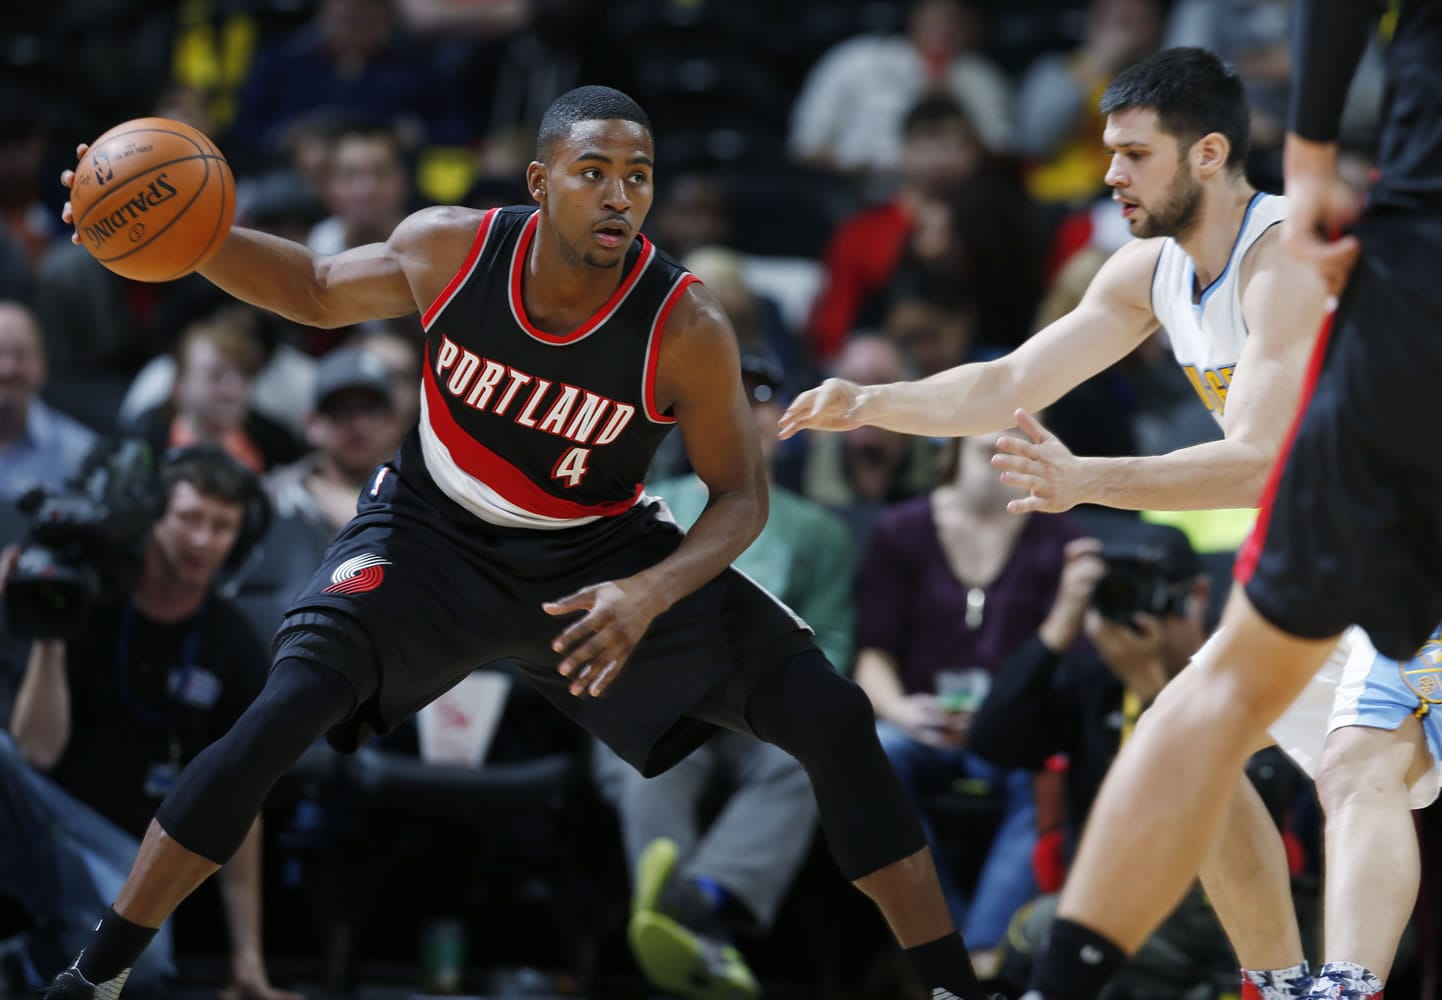 Portland Trail Blazers forward Maurice Harkless, left, pulls in the ball as Denver Nuggets forward Kostas Papanikolaou defends in the second half of an NBA basketball game Monday, Nov. 9, 2015, in Denver. The Nuggets won 108-104.